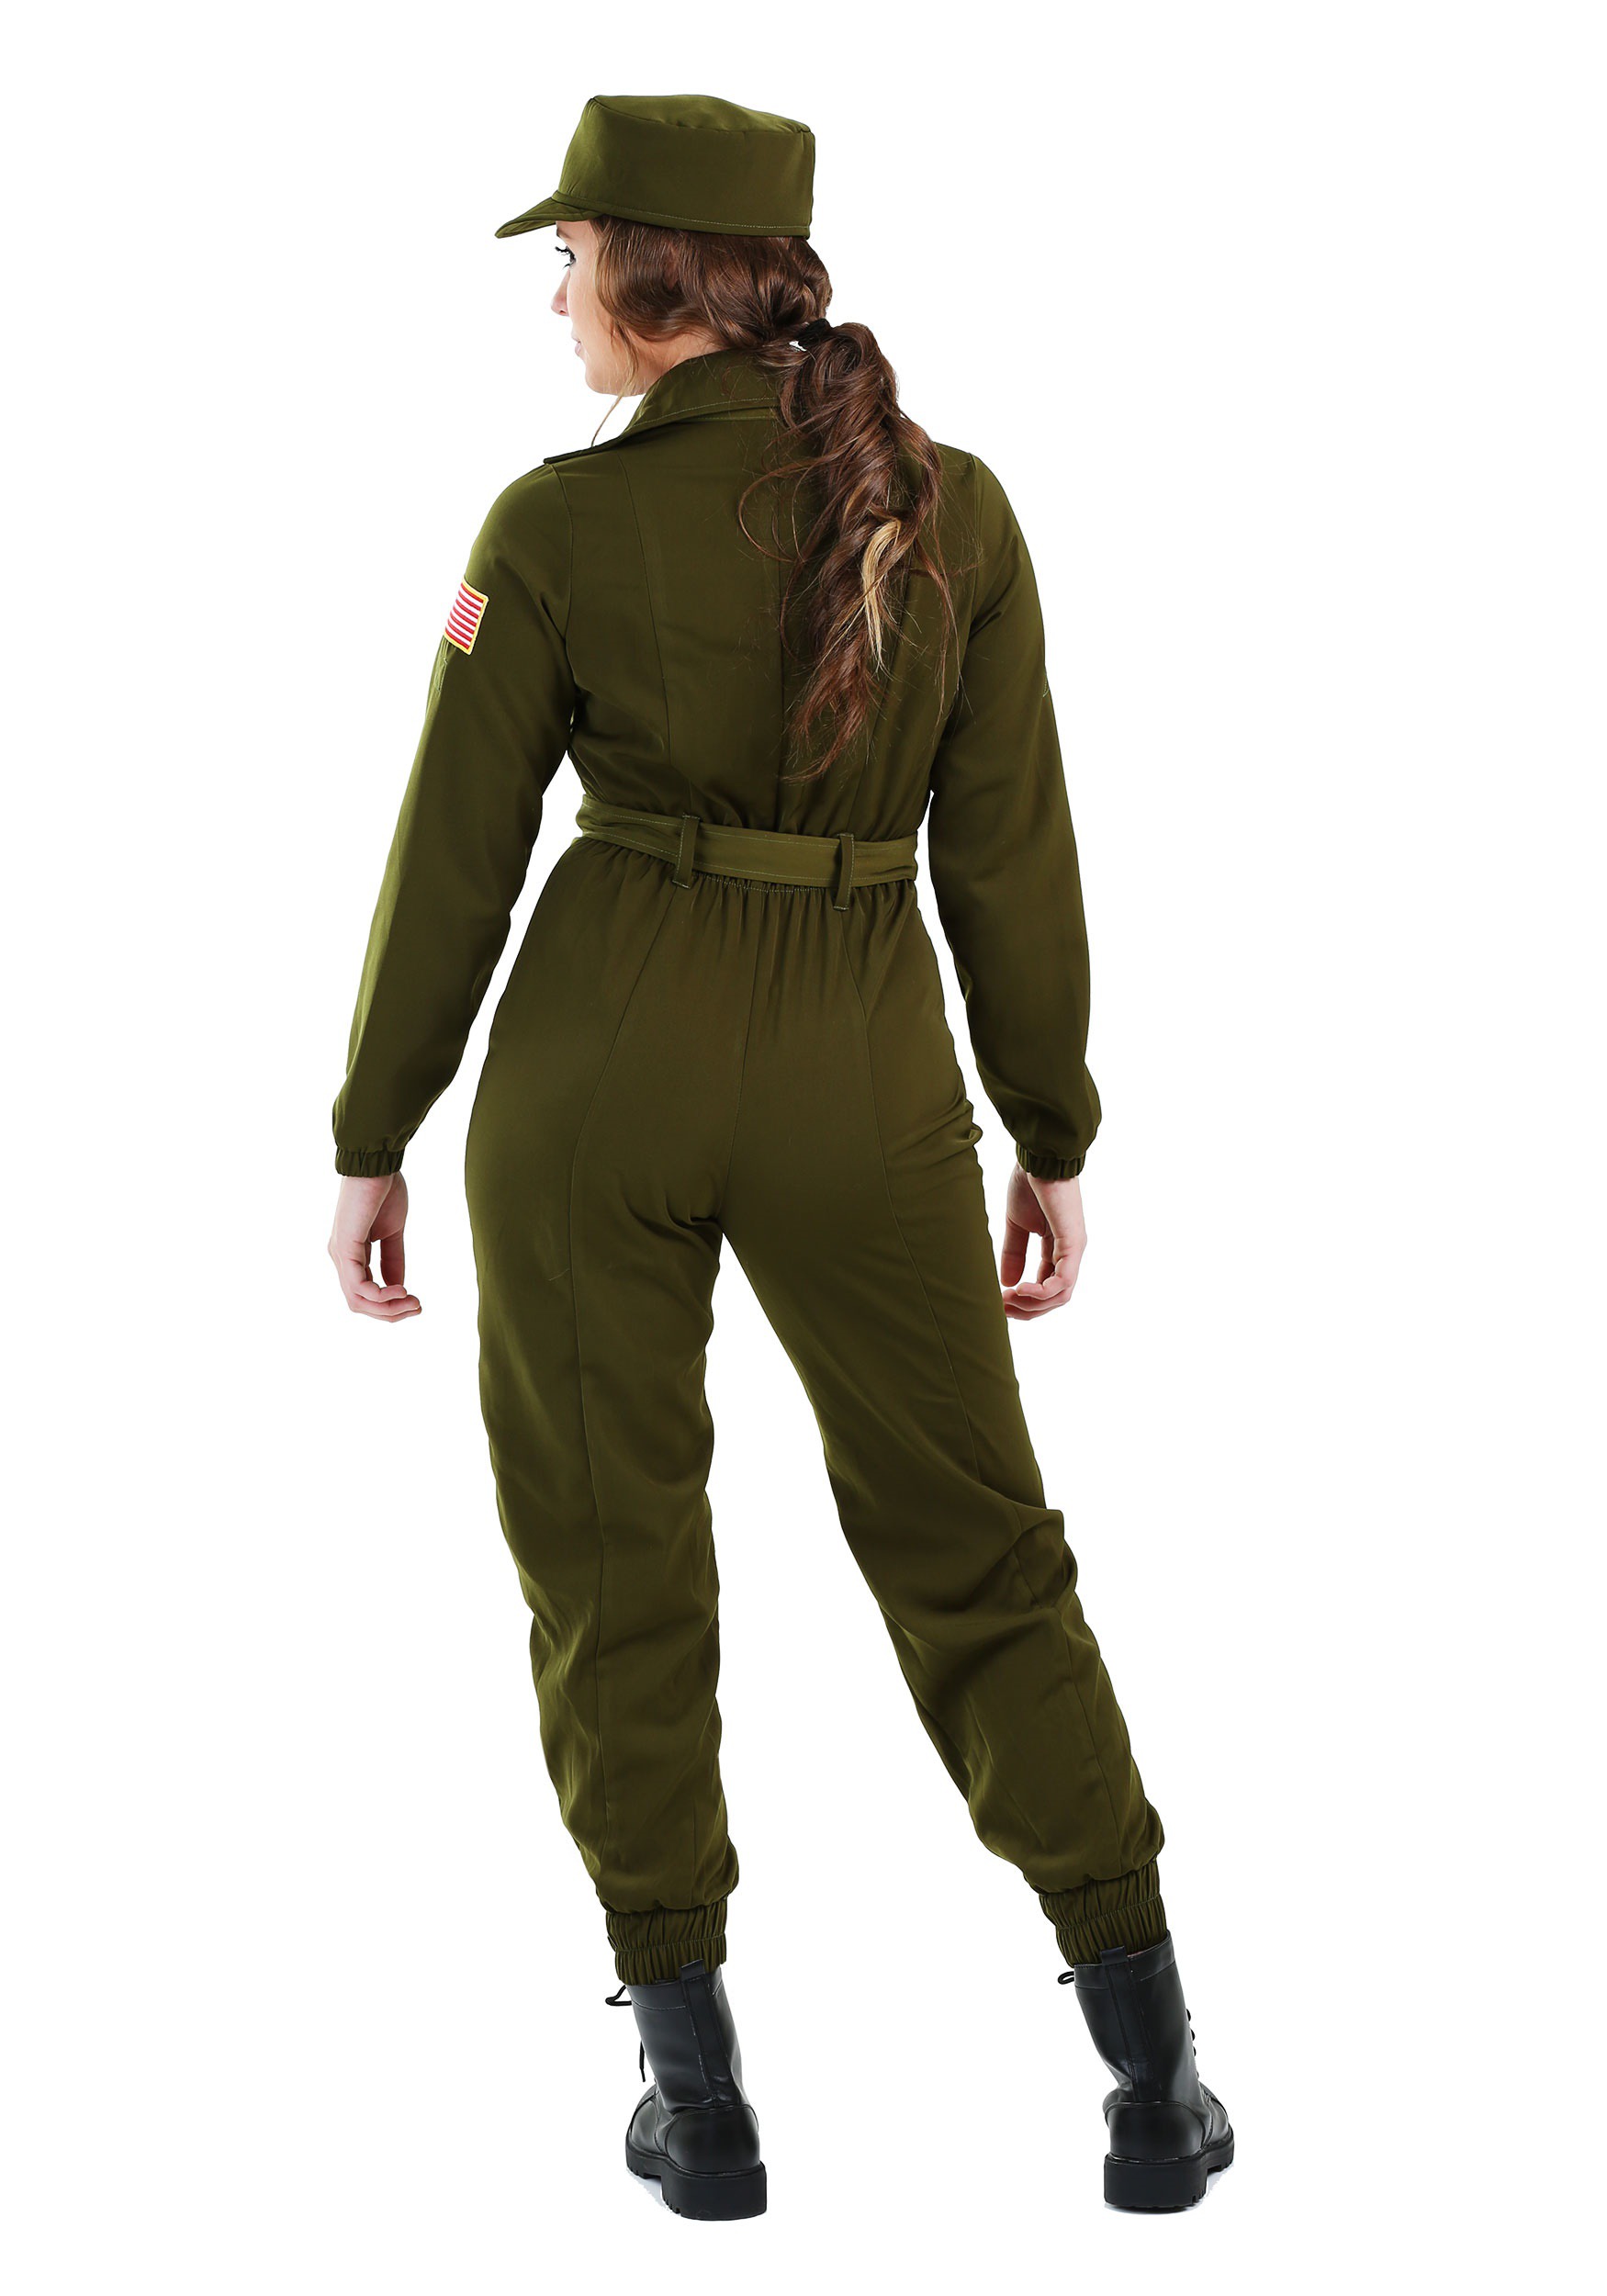 Plus Size Army Flightsuit Costume for Women 1X 2X